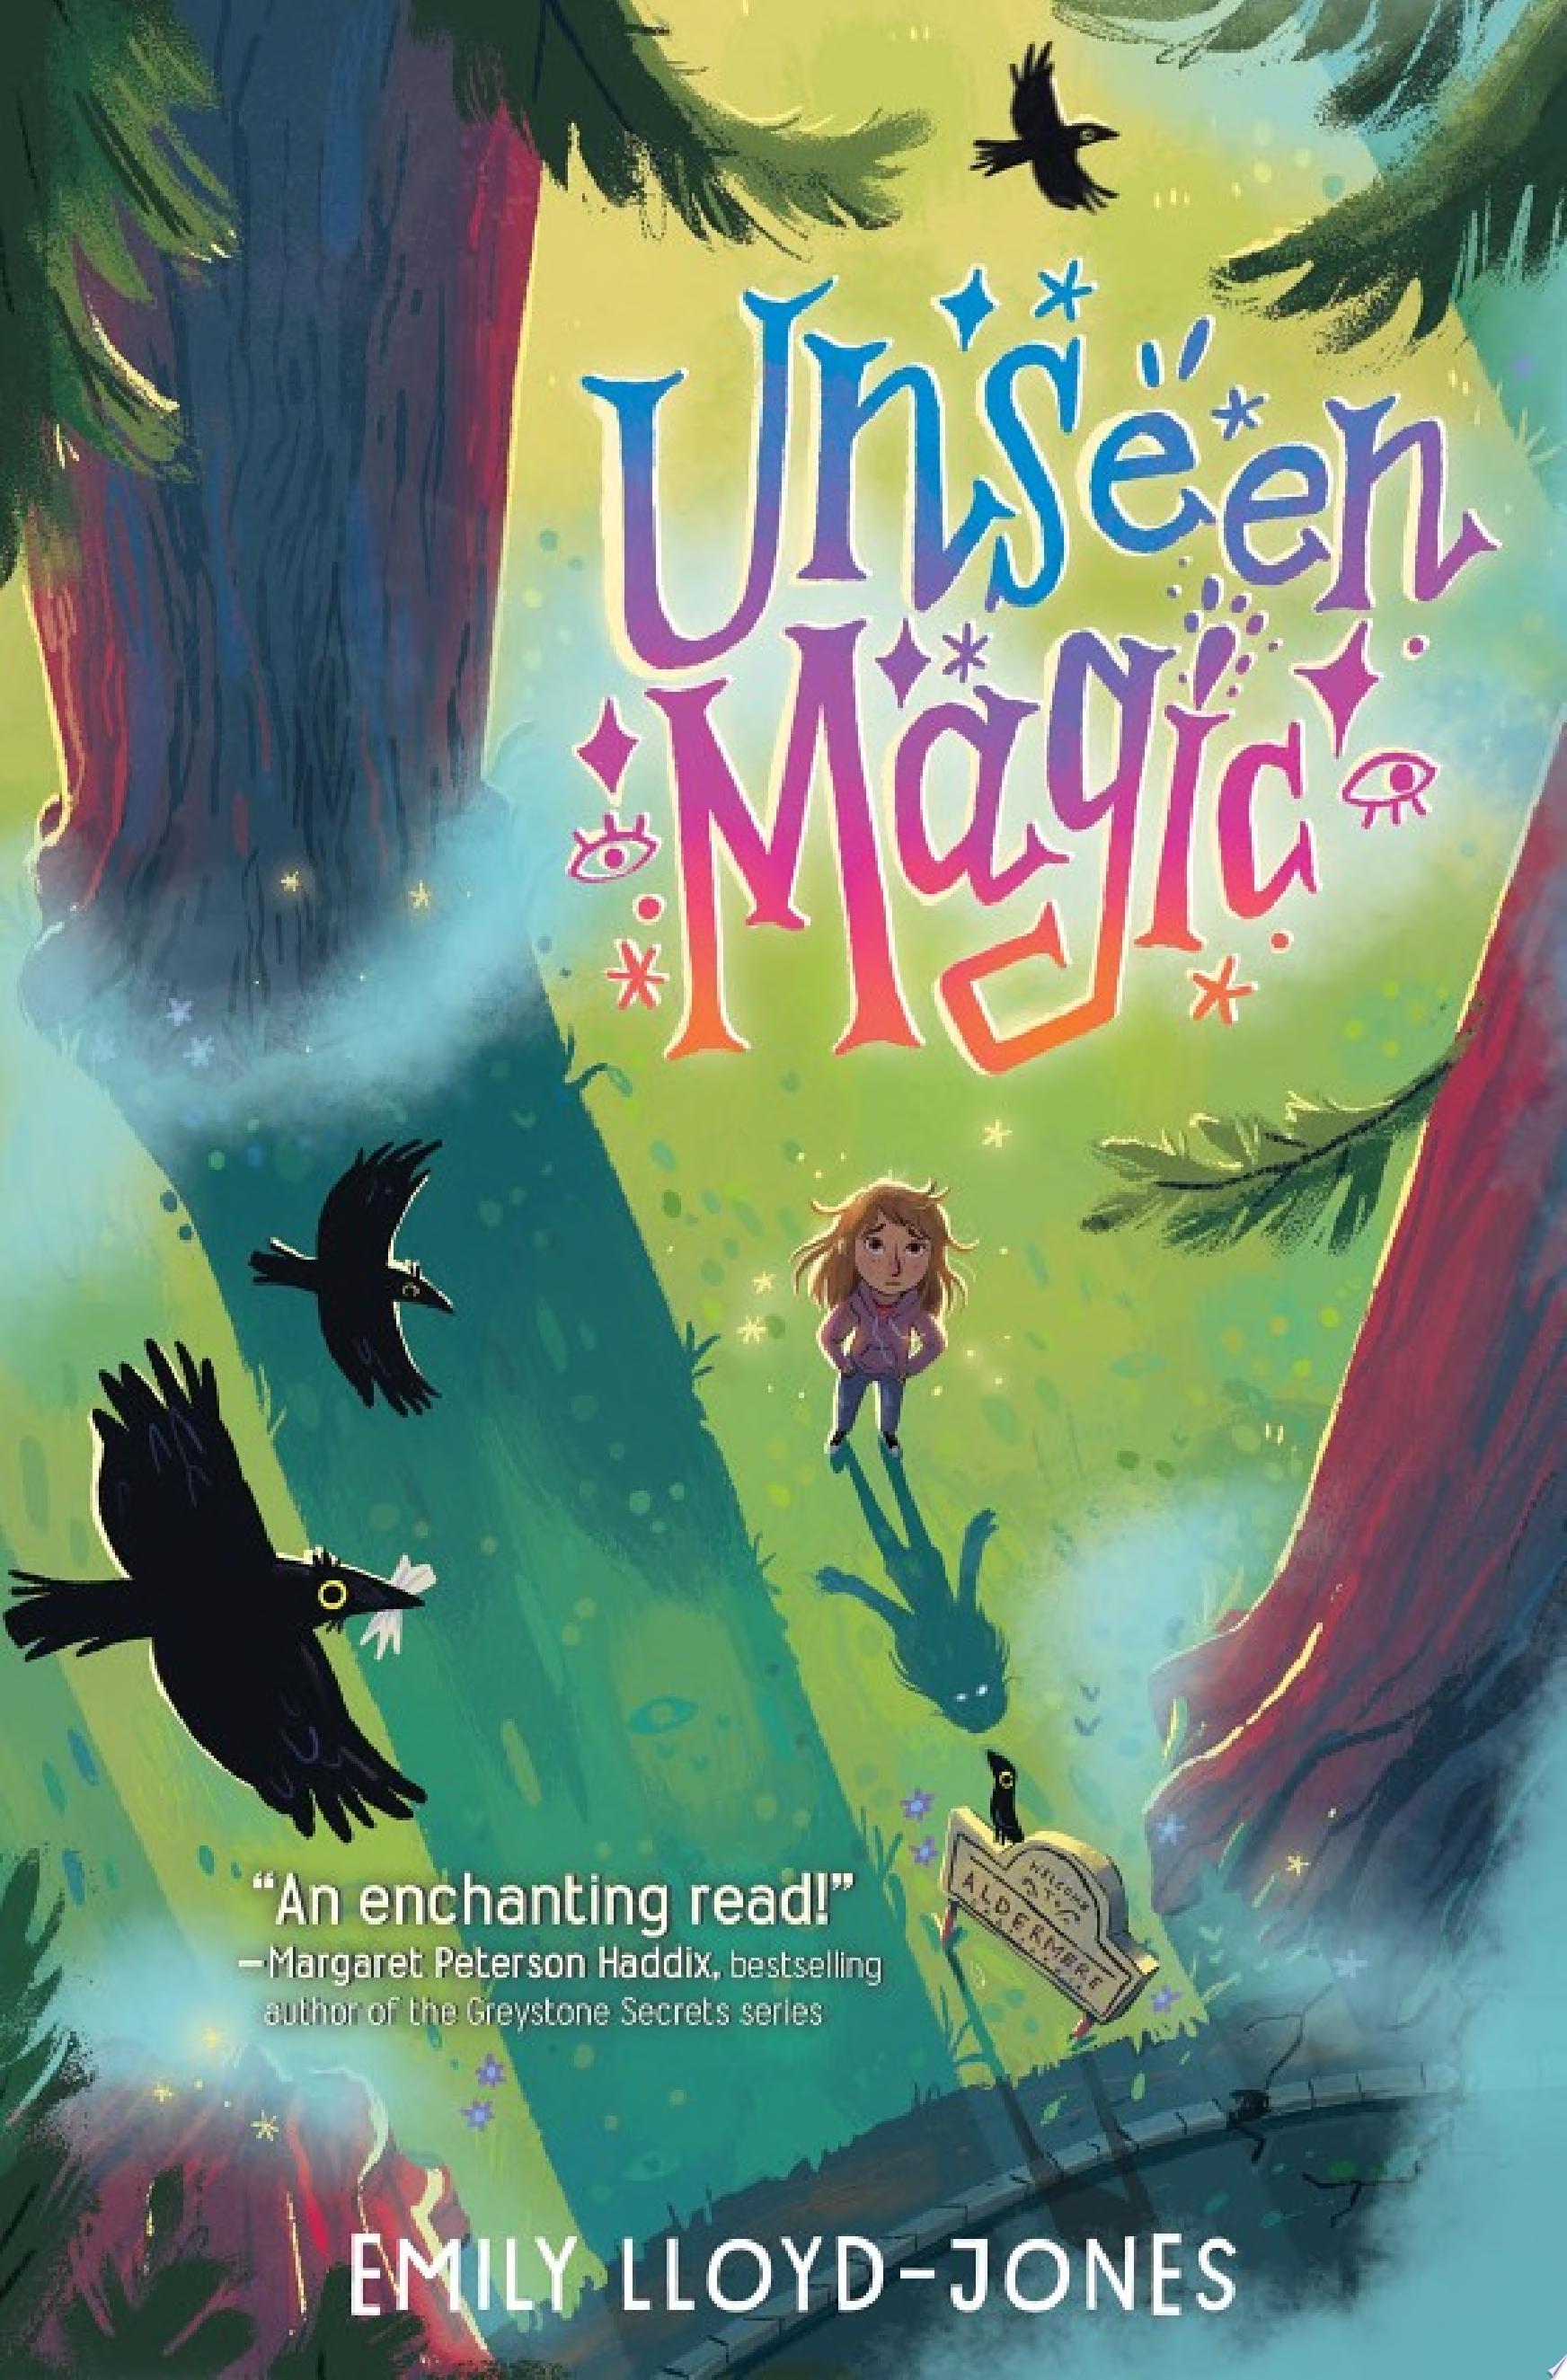 Image for "Unseen Magic"